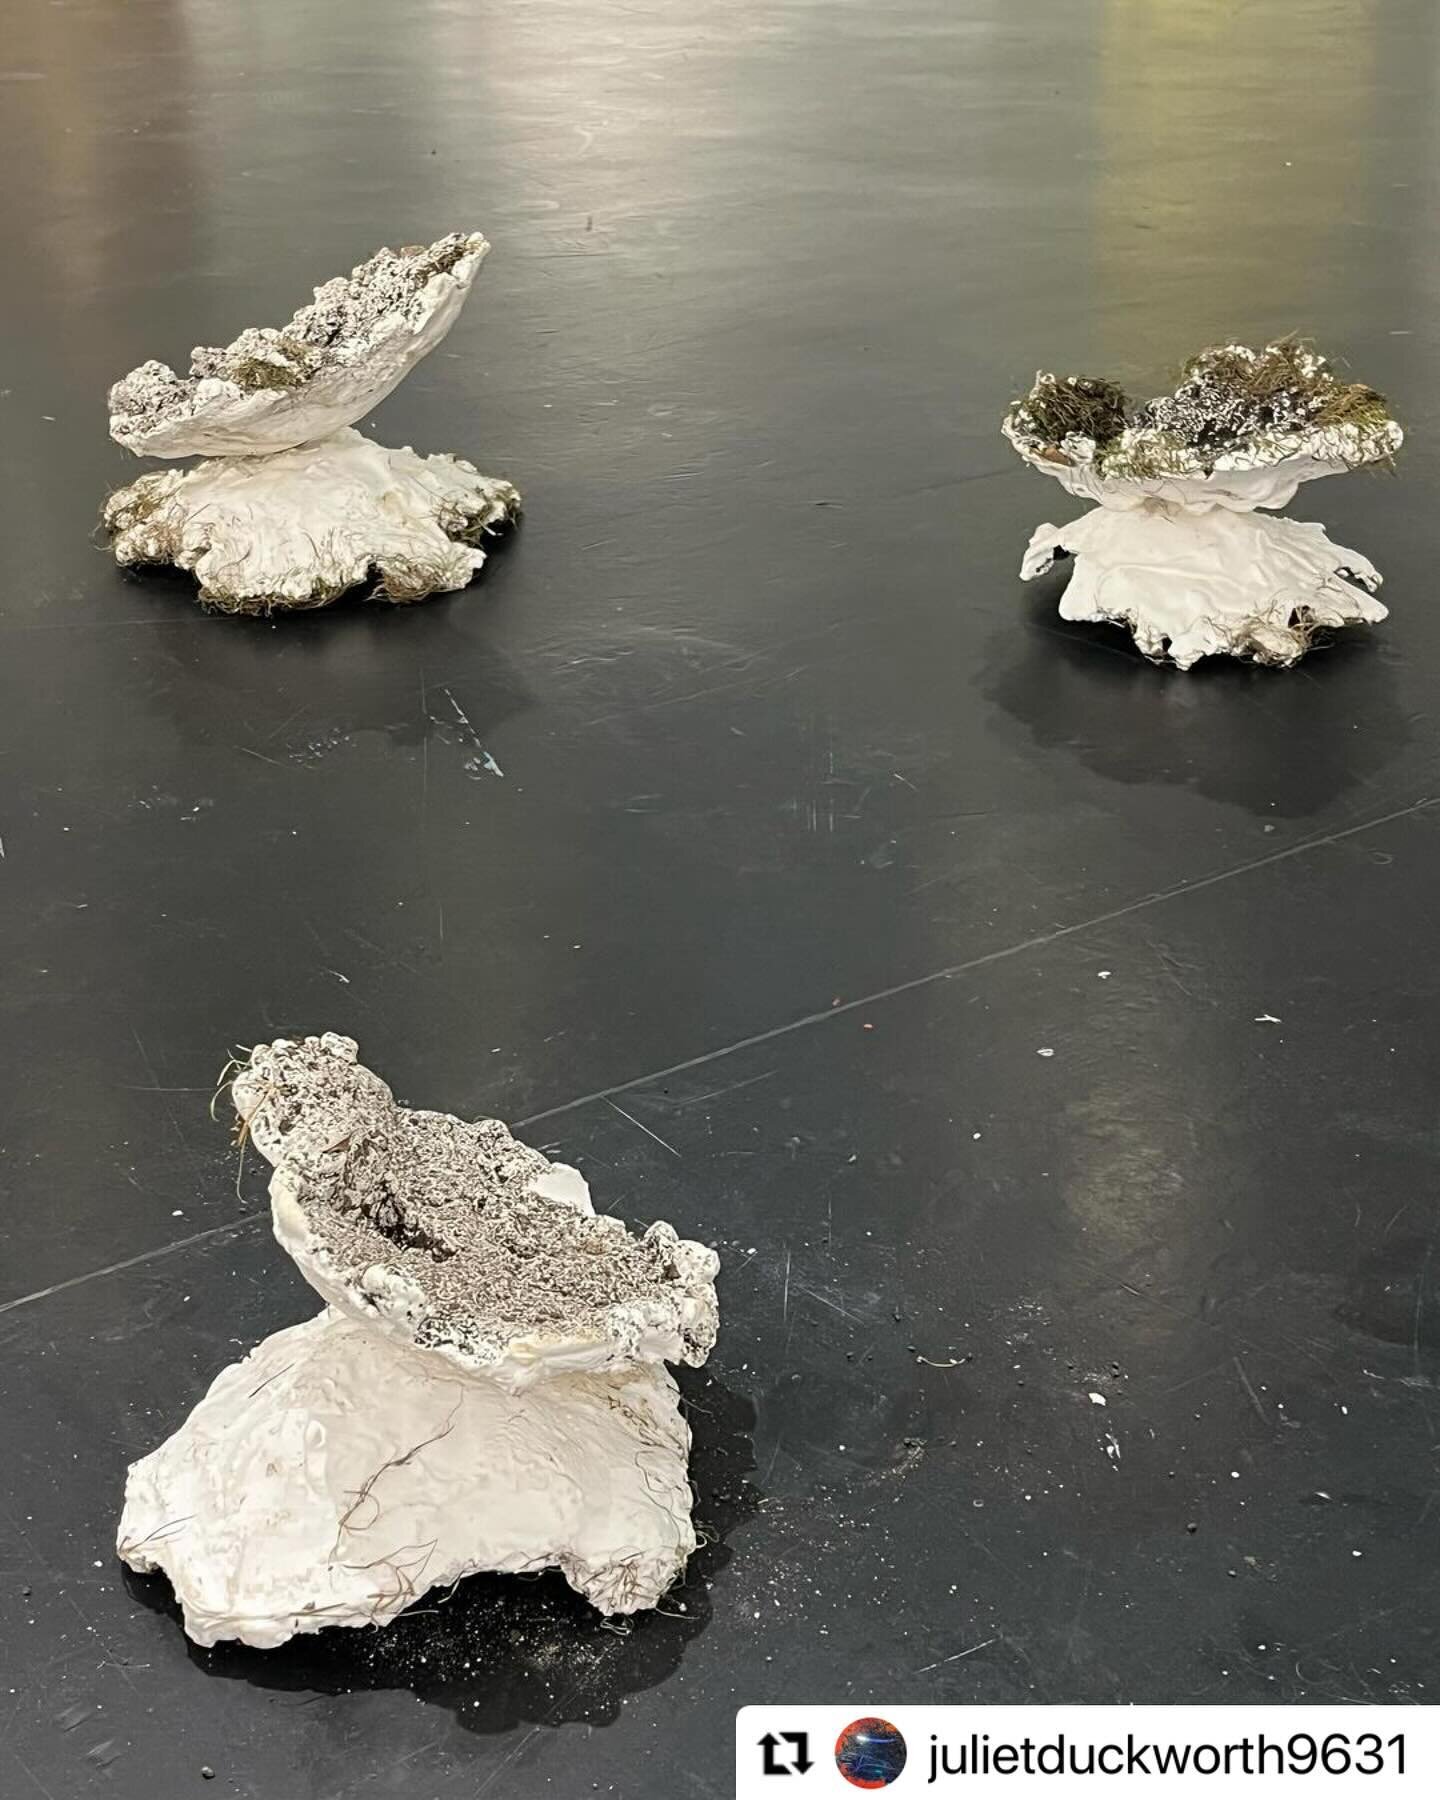 It&rsquo;s wonderful to see @julietduckworth9631&rsquo;s new work! 🤩 #Repost @julietduckworth9631 with @use.repost
・・・
Mole hill mounds. Cast in the place they erupted and emerging as temporary conical shapes of excavated soil. I&rsquo;m curious abo